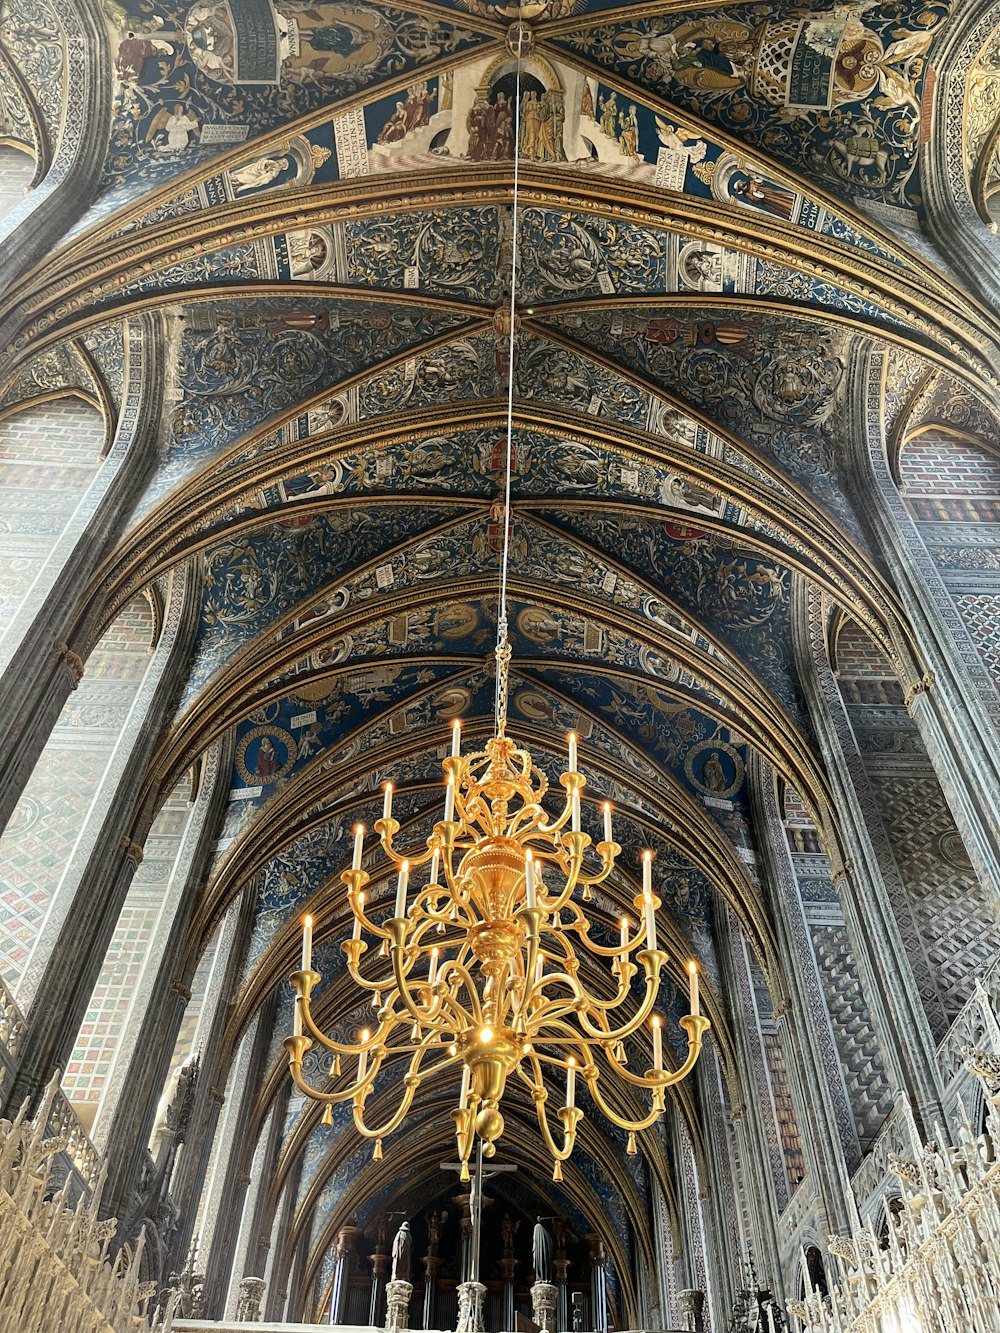 a large ornate ceiling with a gold statue